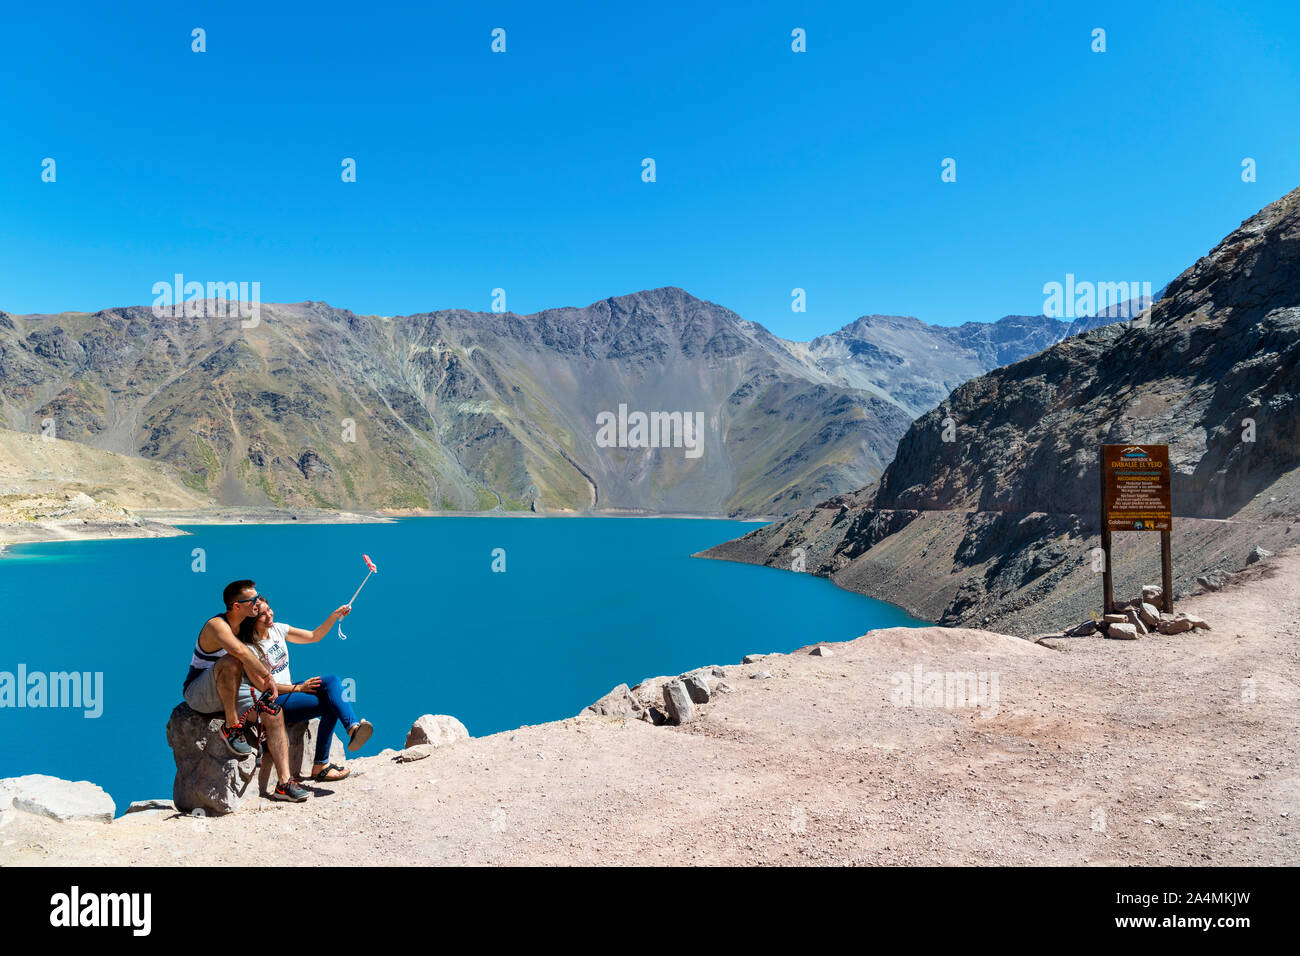 Chile, Andes Mountains. Young couple taking a selfie with a selfie stick at the Embalse el Yeso (El Yeso Dam), Andes Mountains, Chile, South America Stock Photo